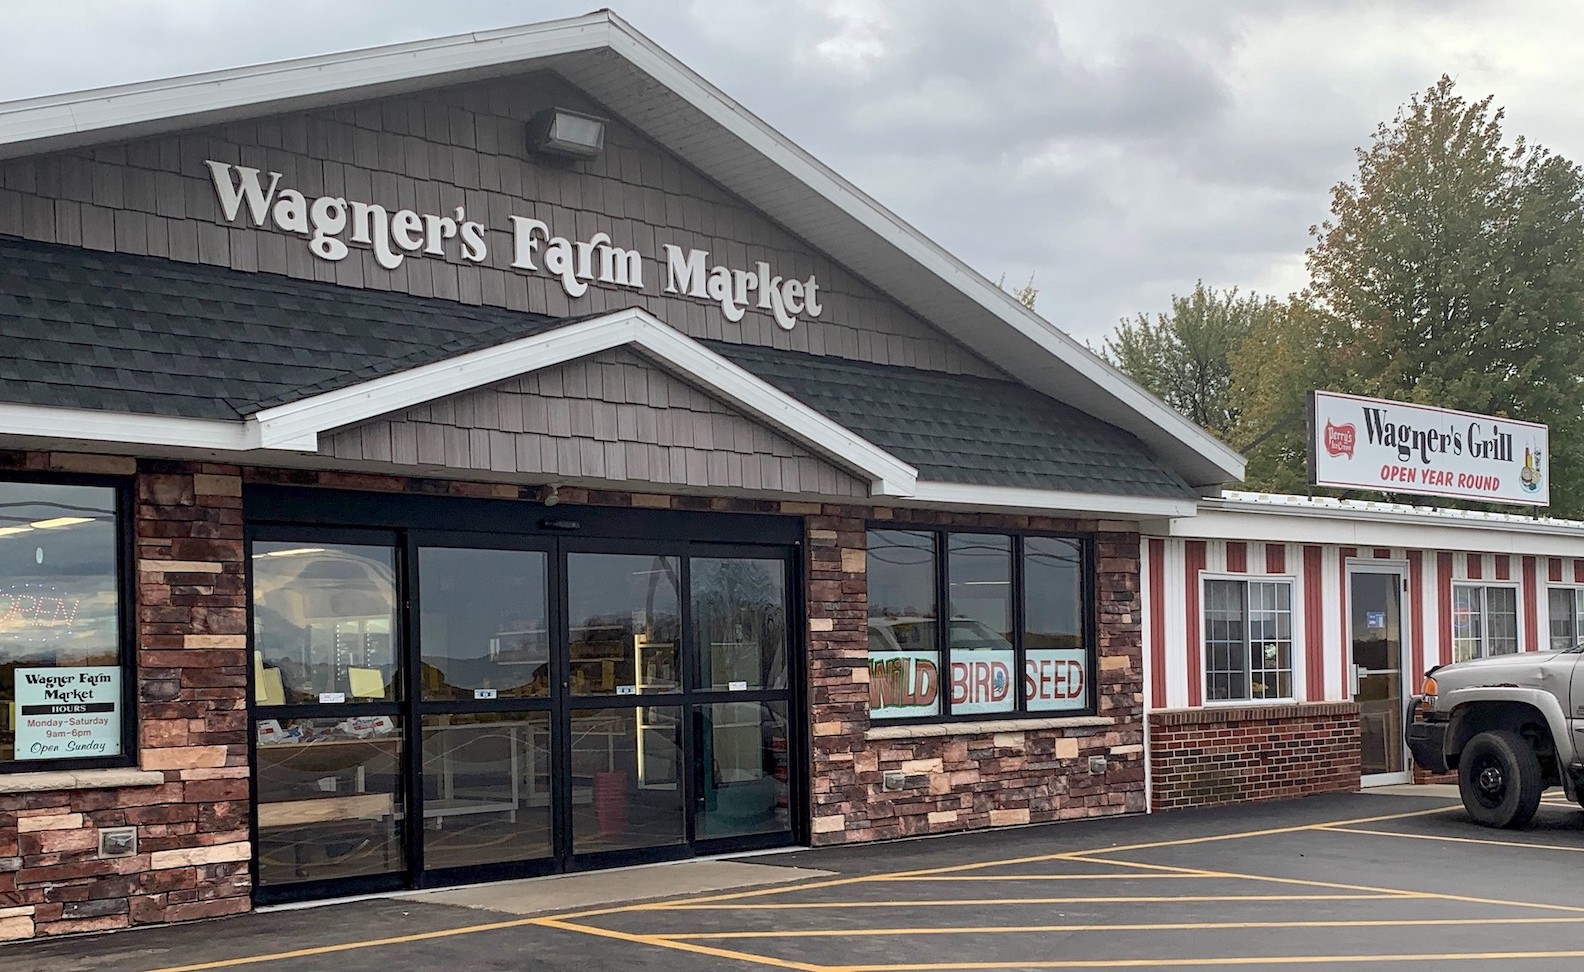 Wagner's Farm Market and Grill on Lockport Road is a mainstay for local produce, meals and apple lovers for over 100 years.